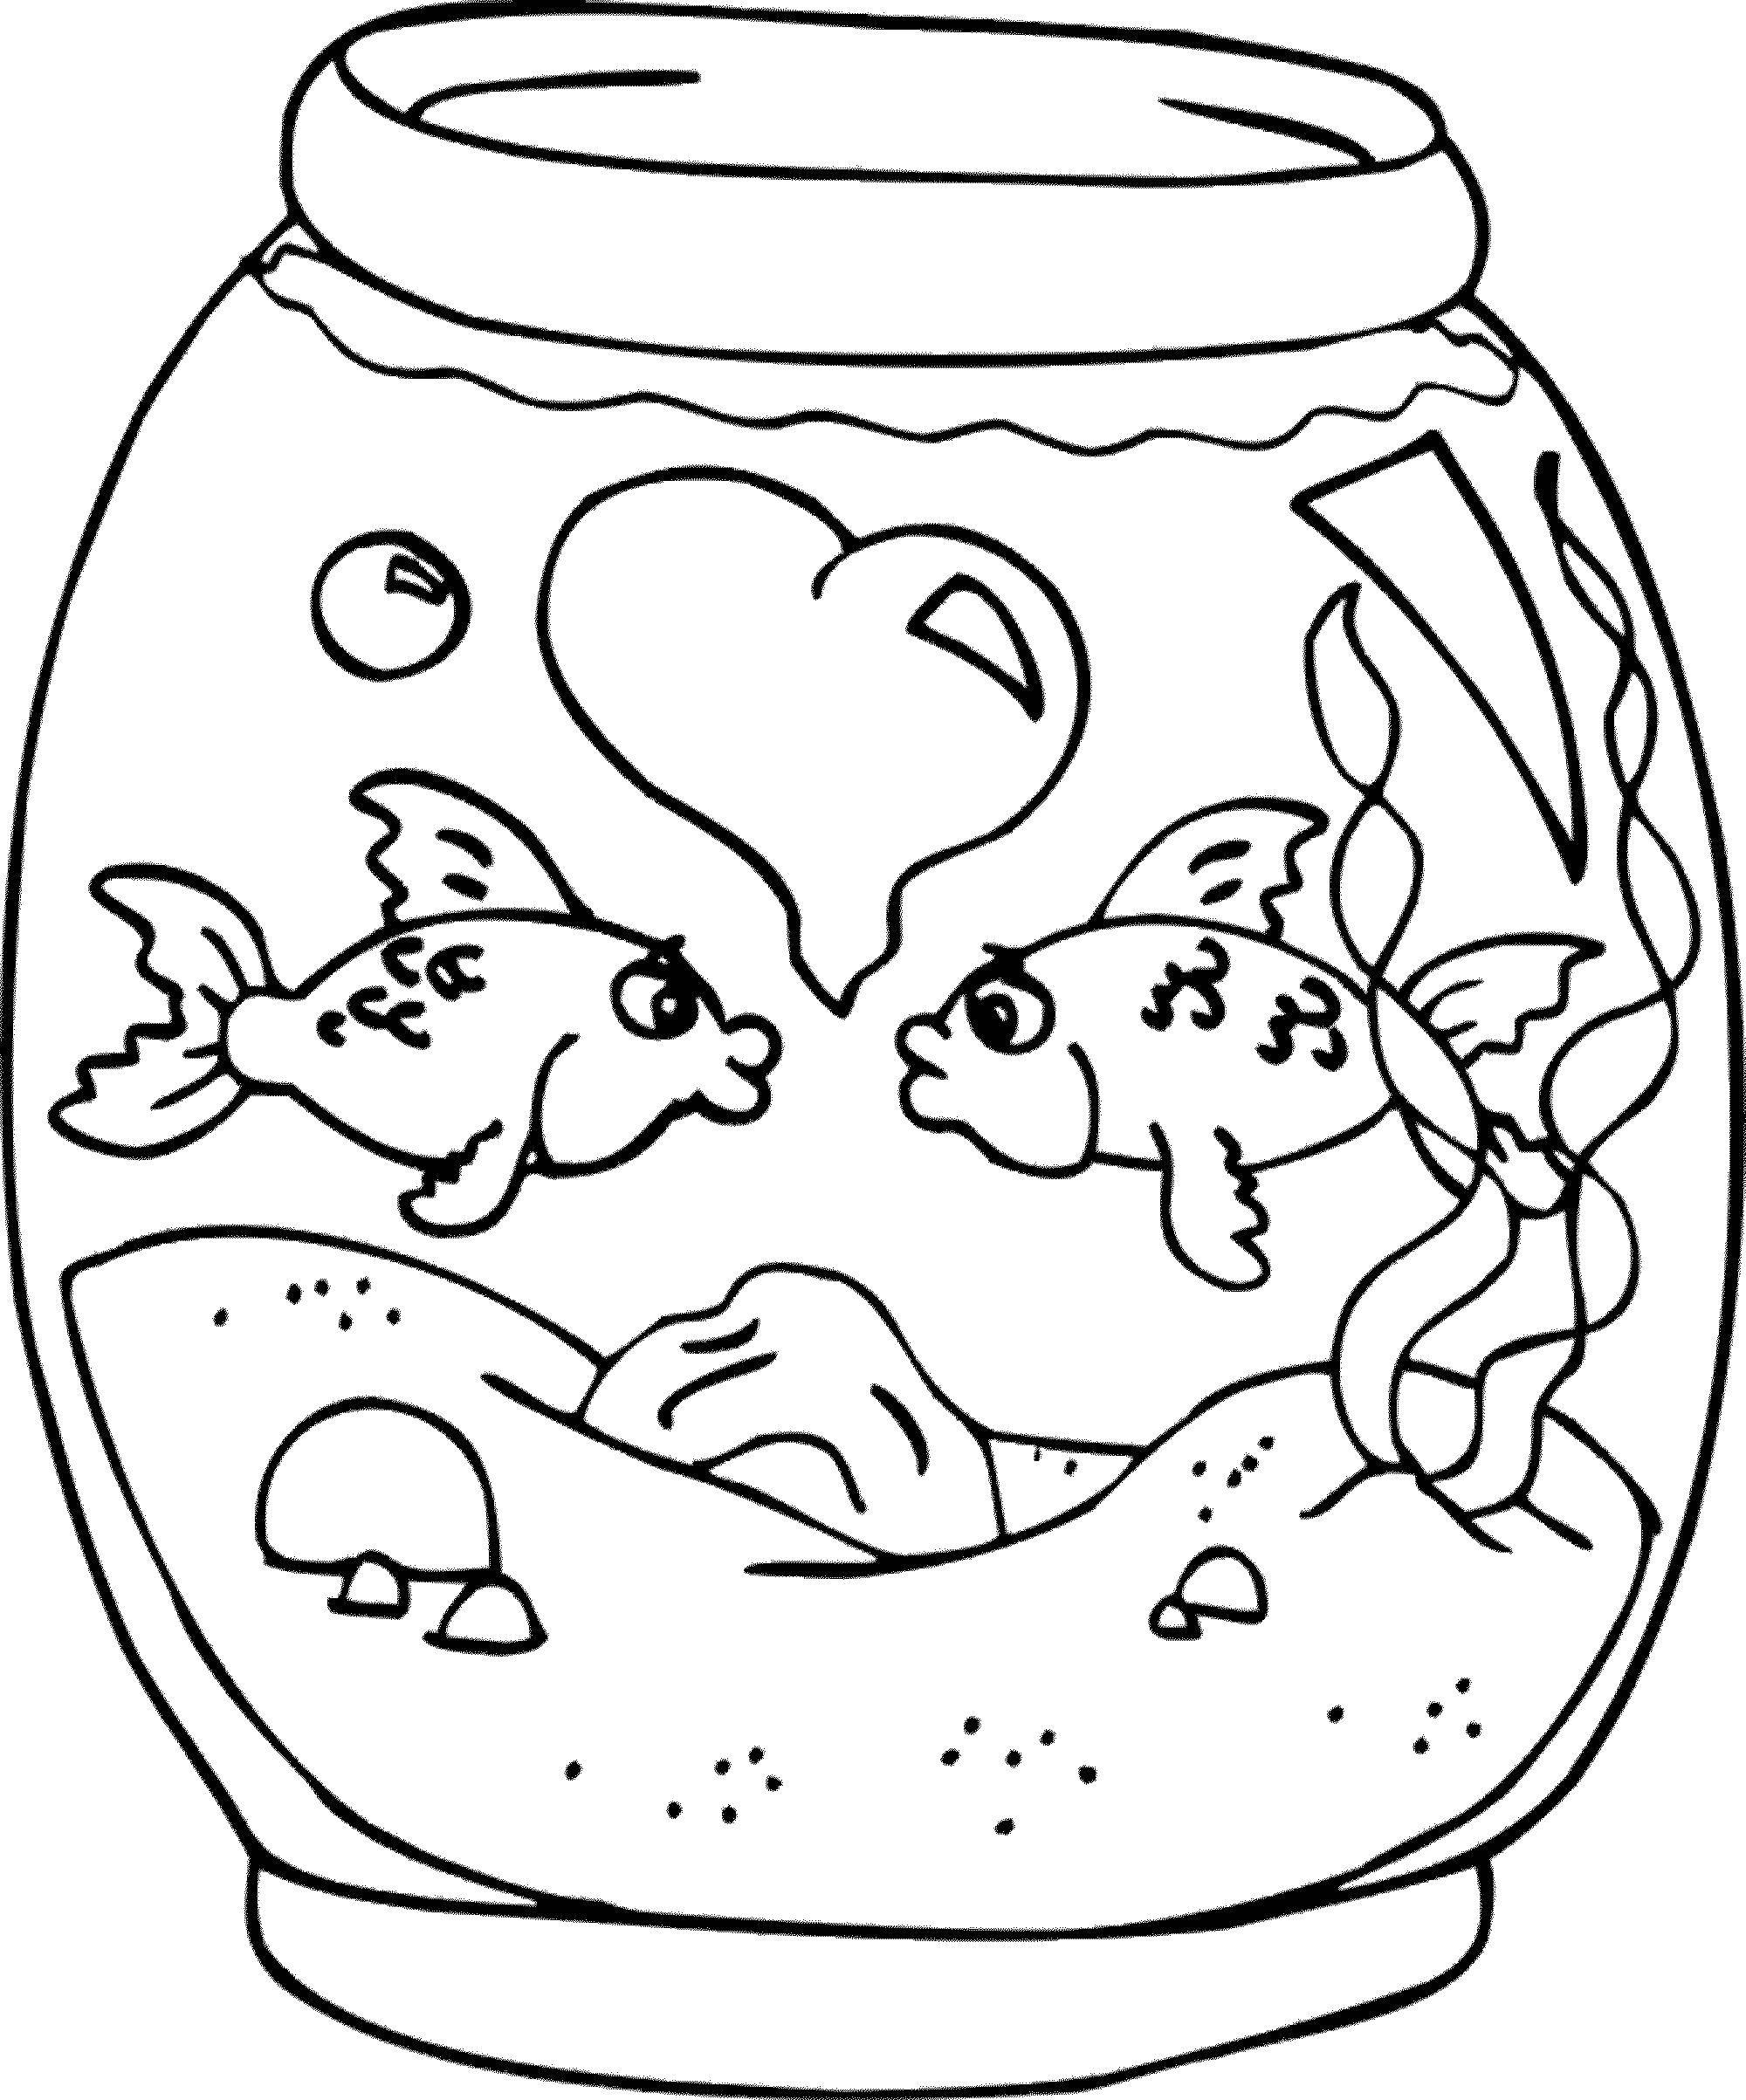 Coloring Lovers of fish in an aquarium. Category Valentines day. Tags:  Valentines day, love, heart.